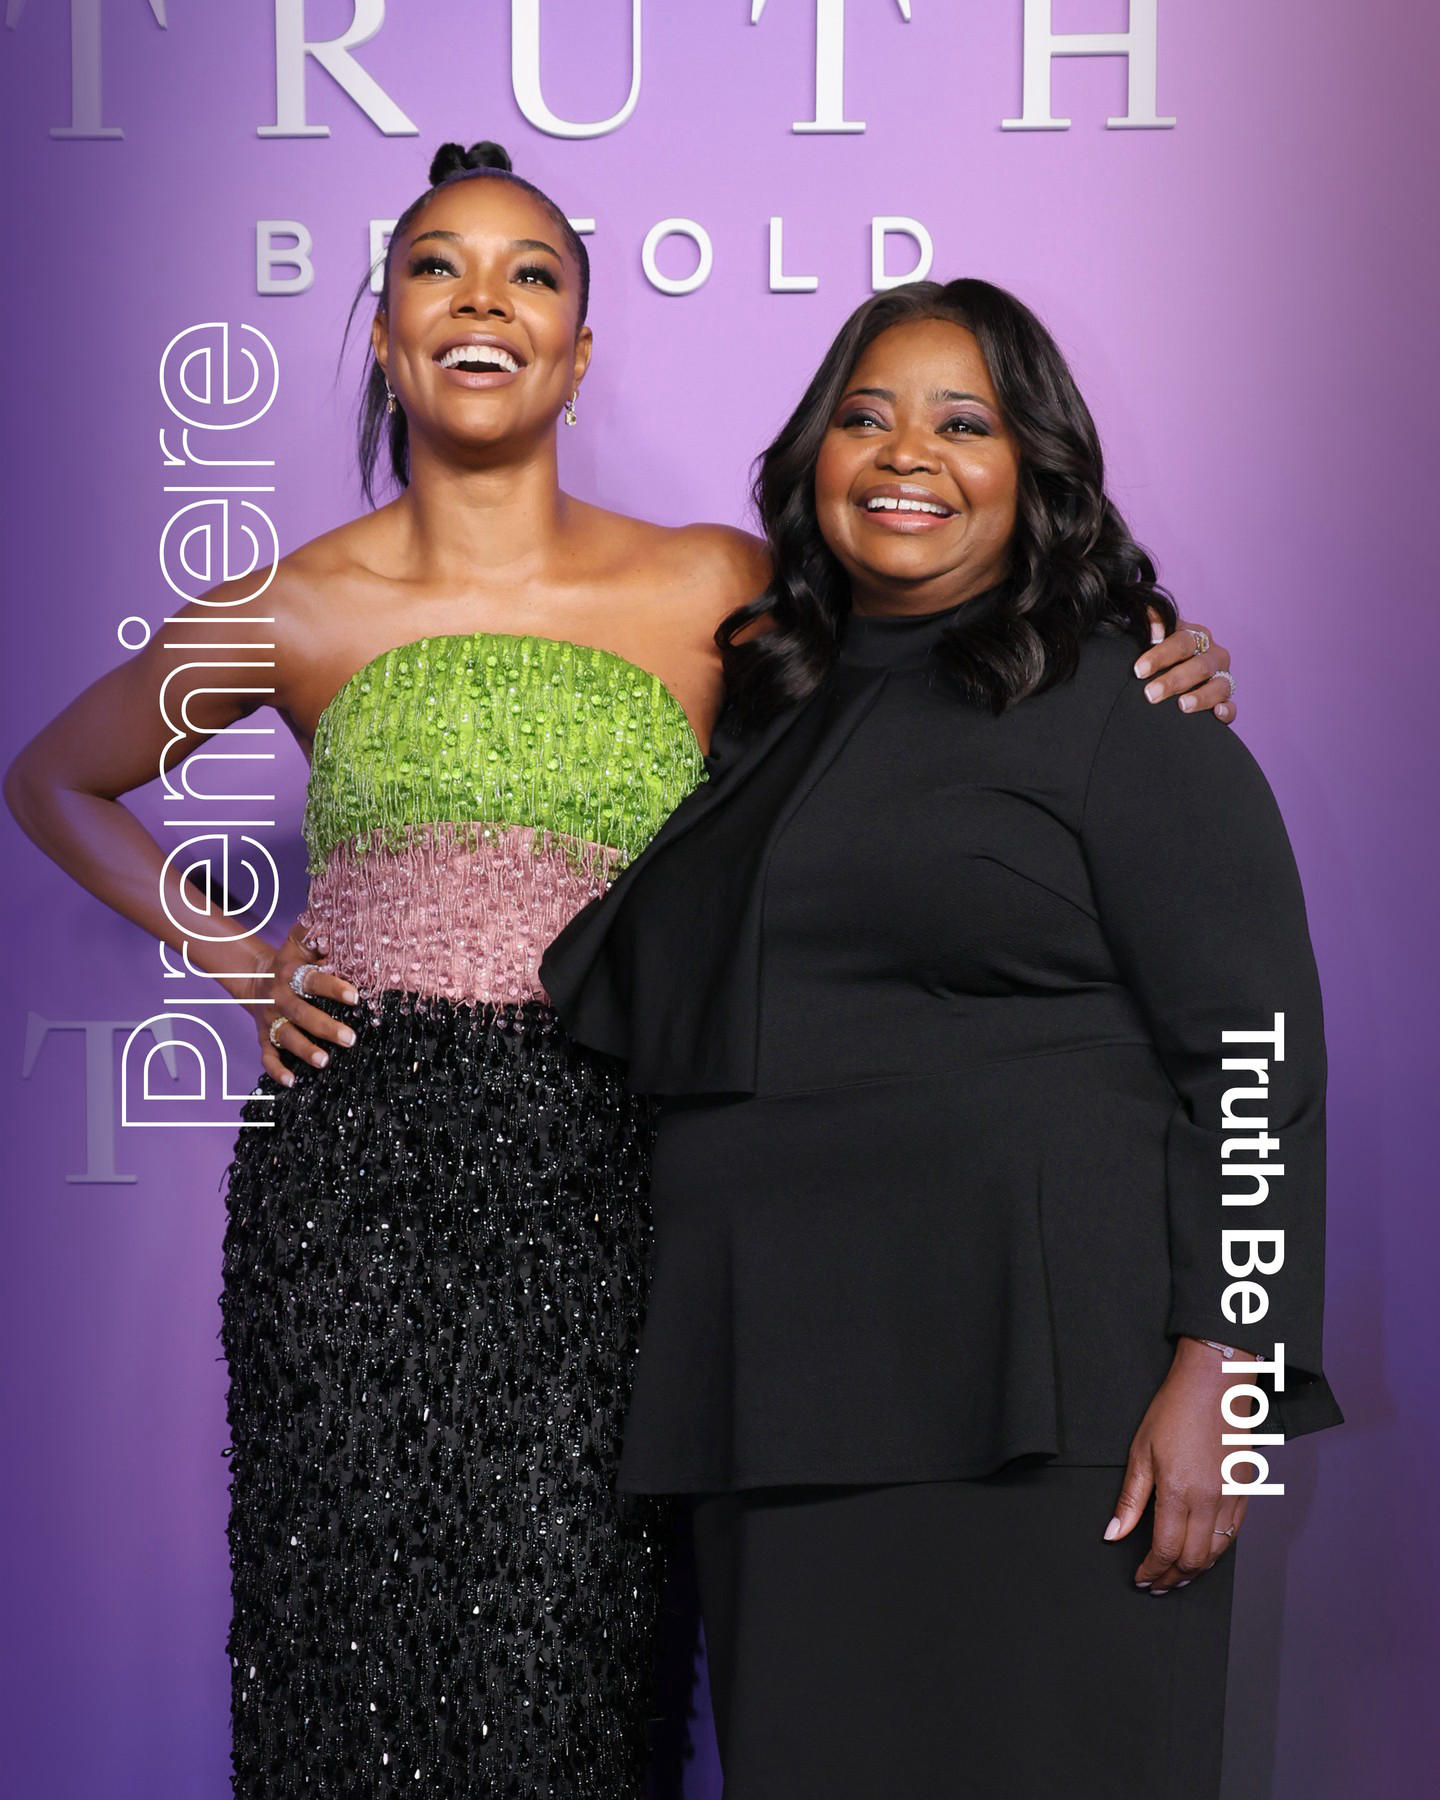 #octaviaspencer, #gabunion, and the rest of the #TruthBeTold family gathered to celebrate the premie